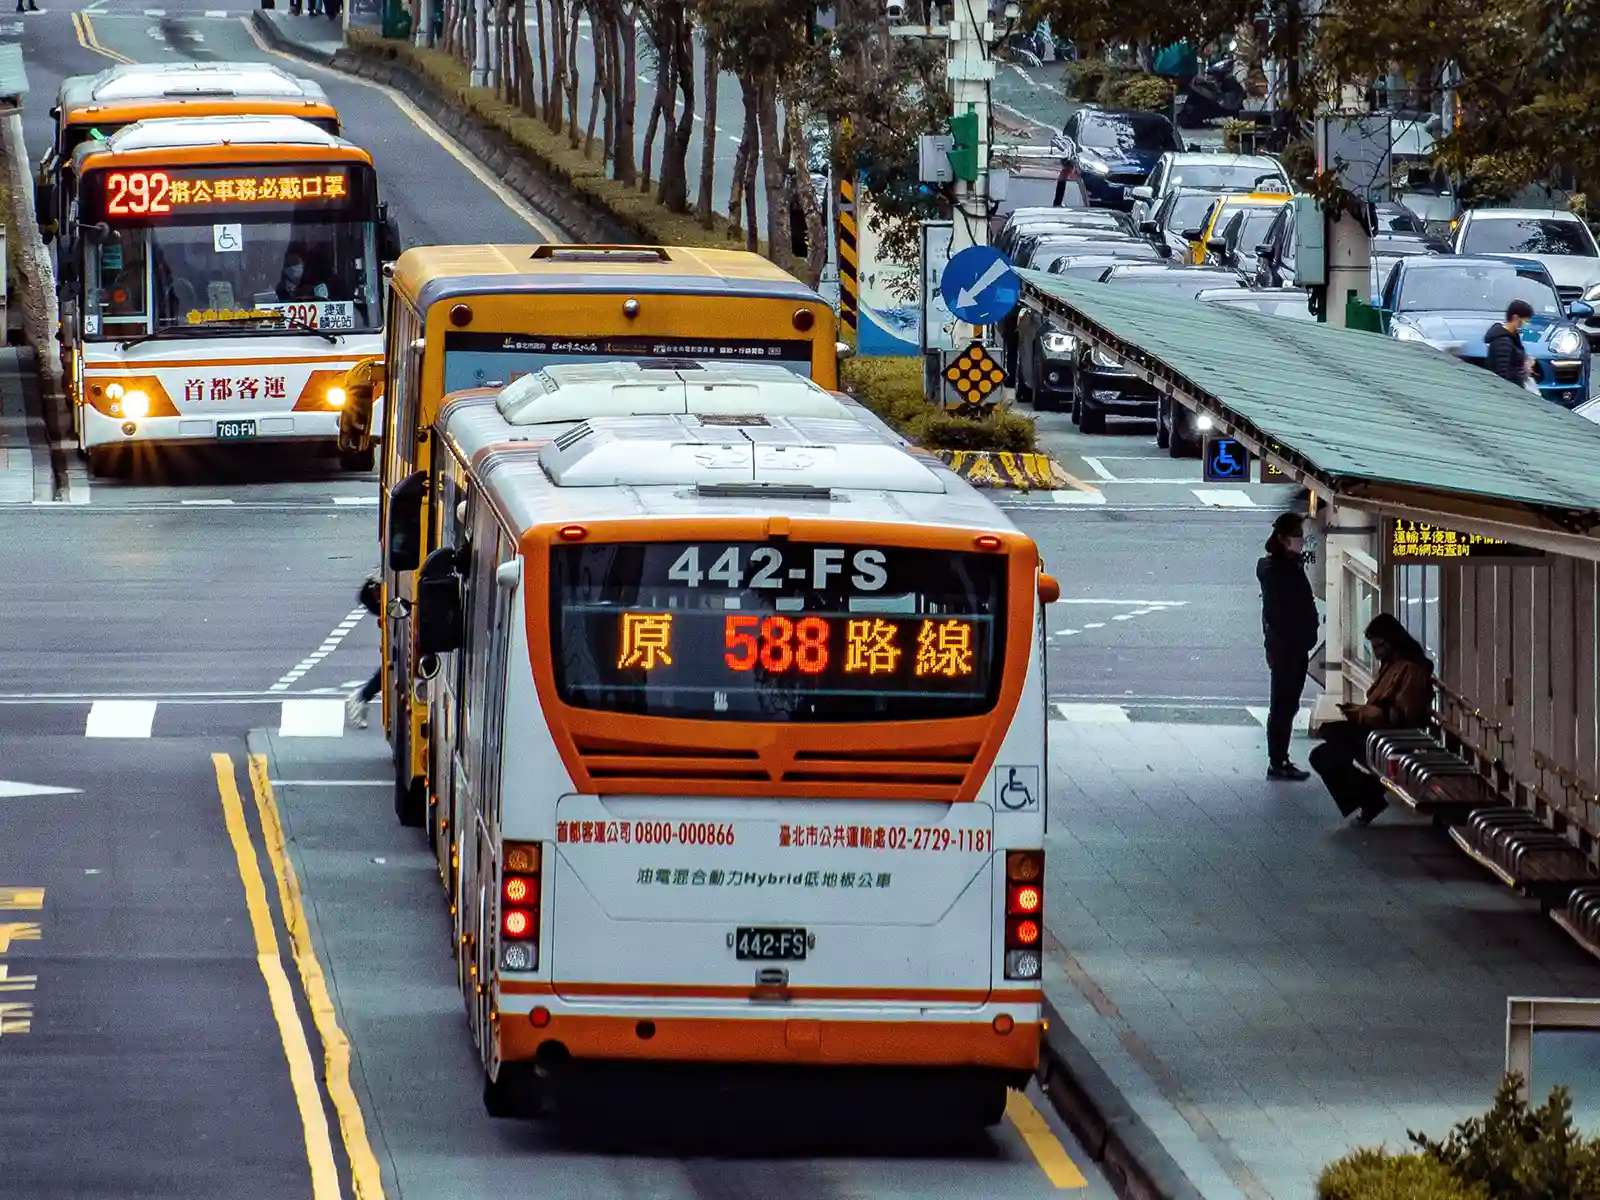 Several busses are stopped at a bus station located in the middle of a road.